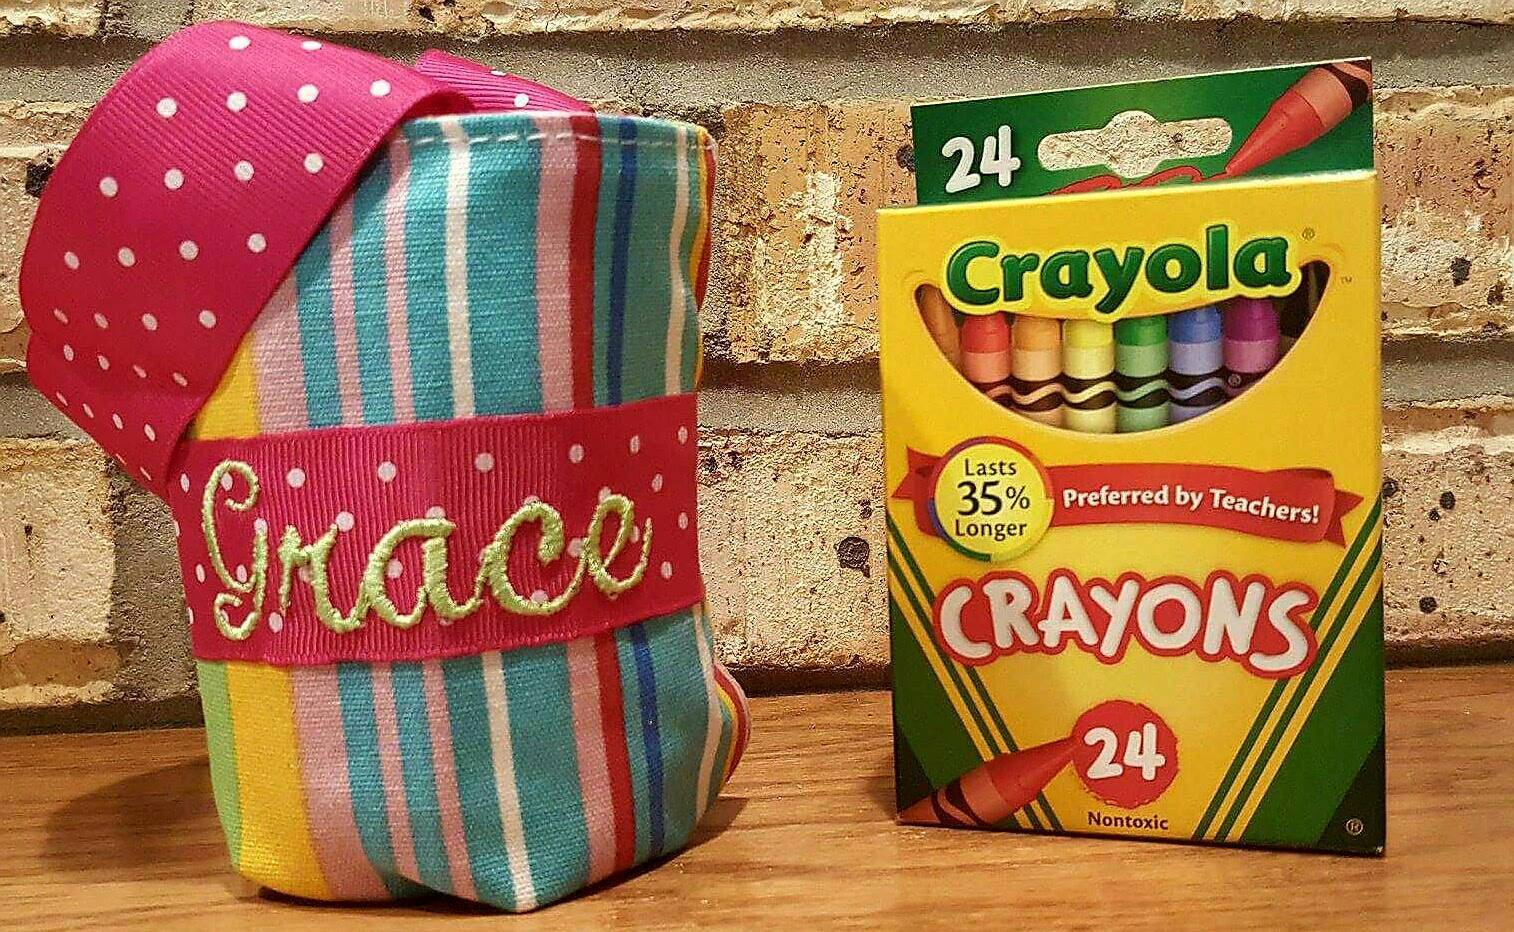 FREE SHIPPING - Personalized Crayola Doodlebugz Crayon Keepers - Embroidered Crayola Crayon Carrier - Monogrammed Crayon Roll Up Carrier